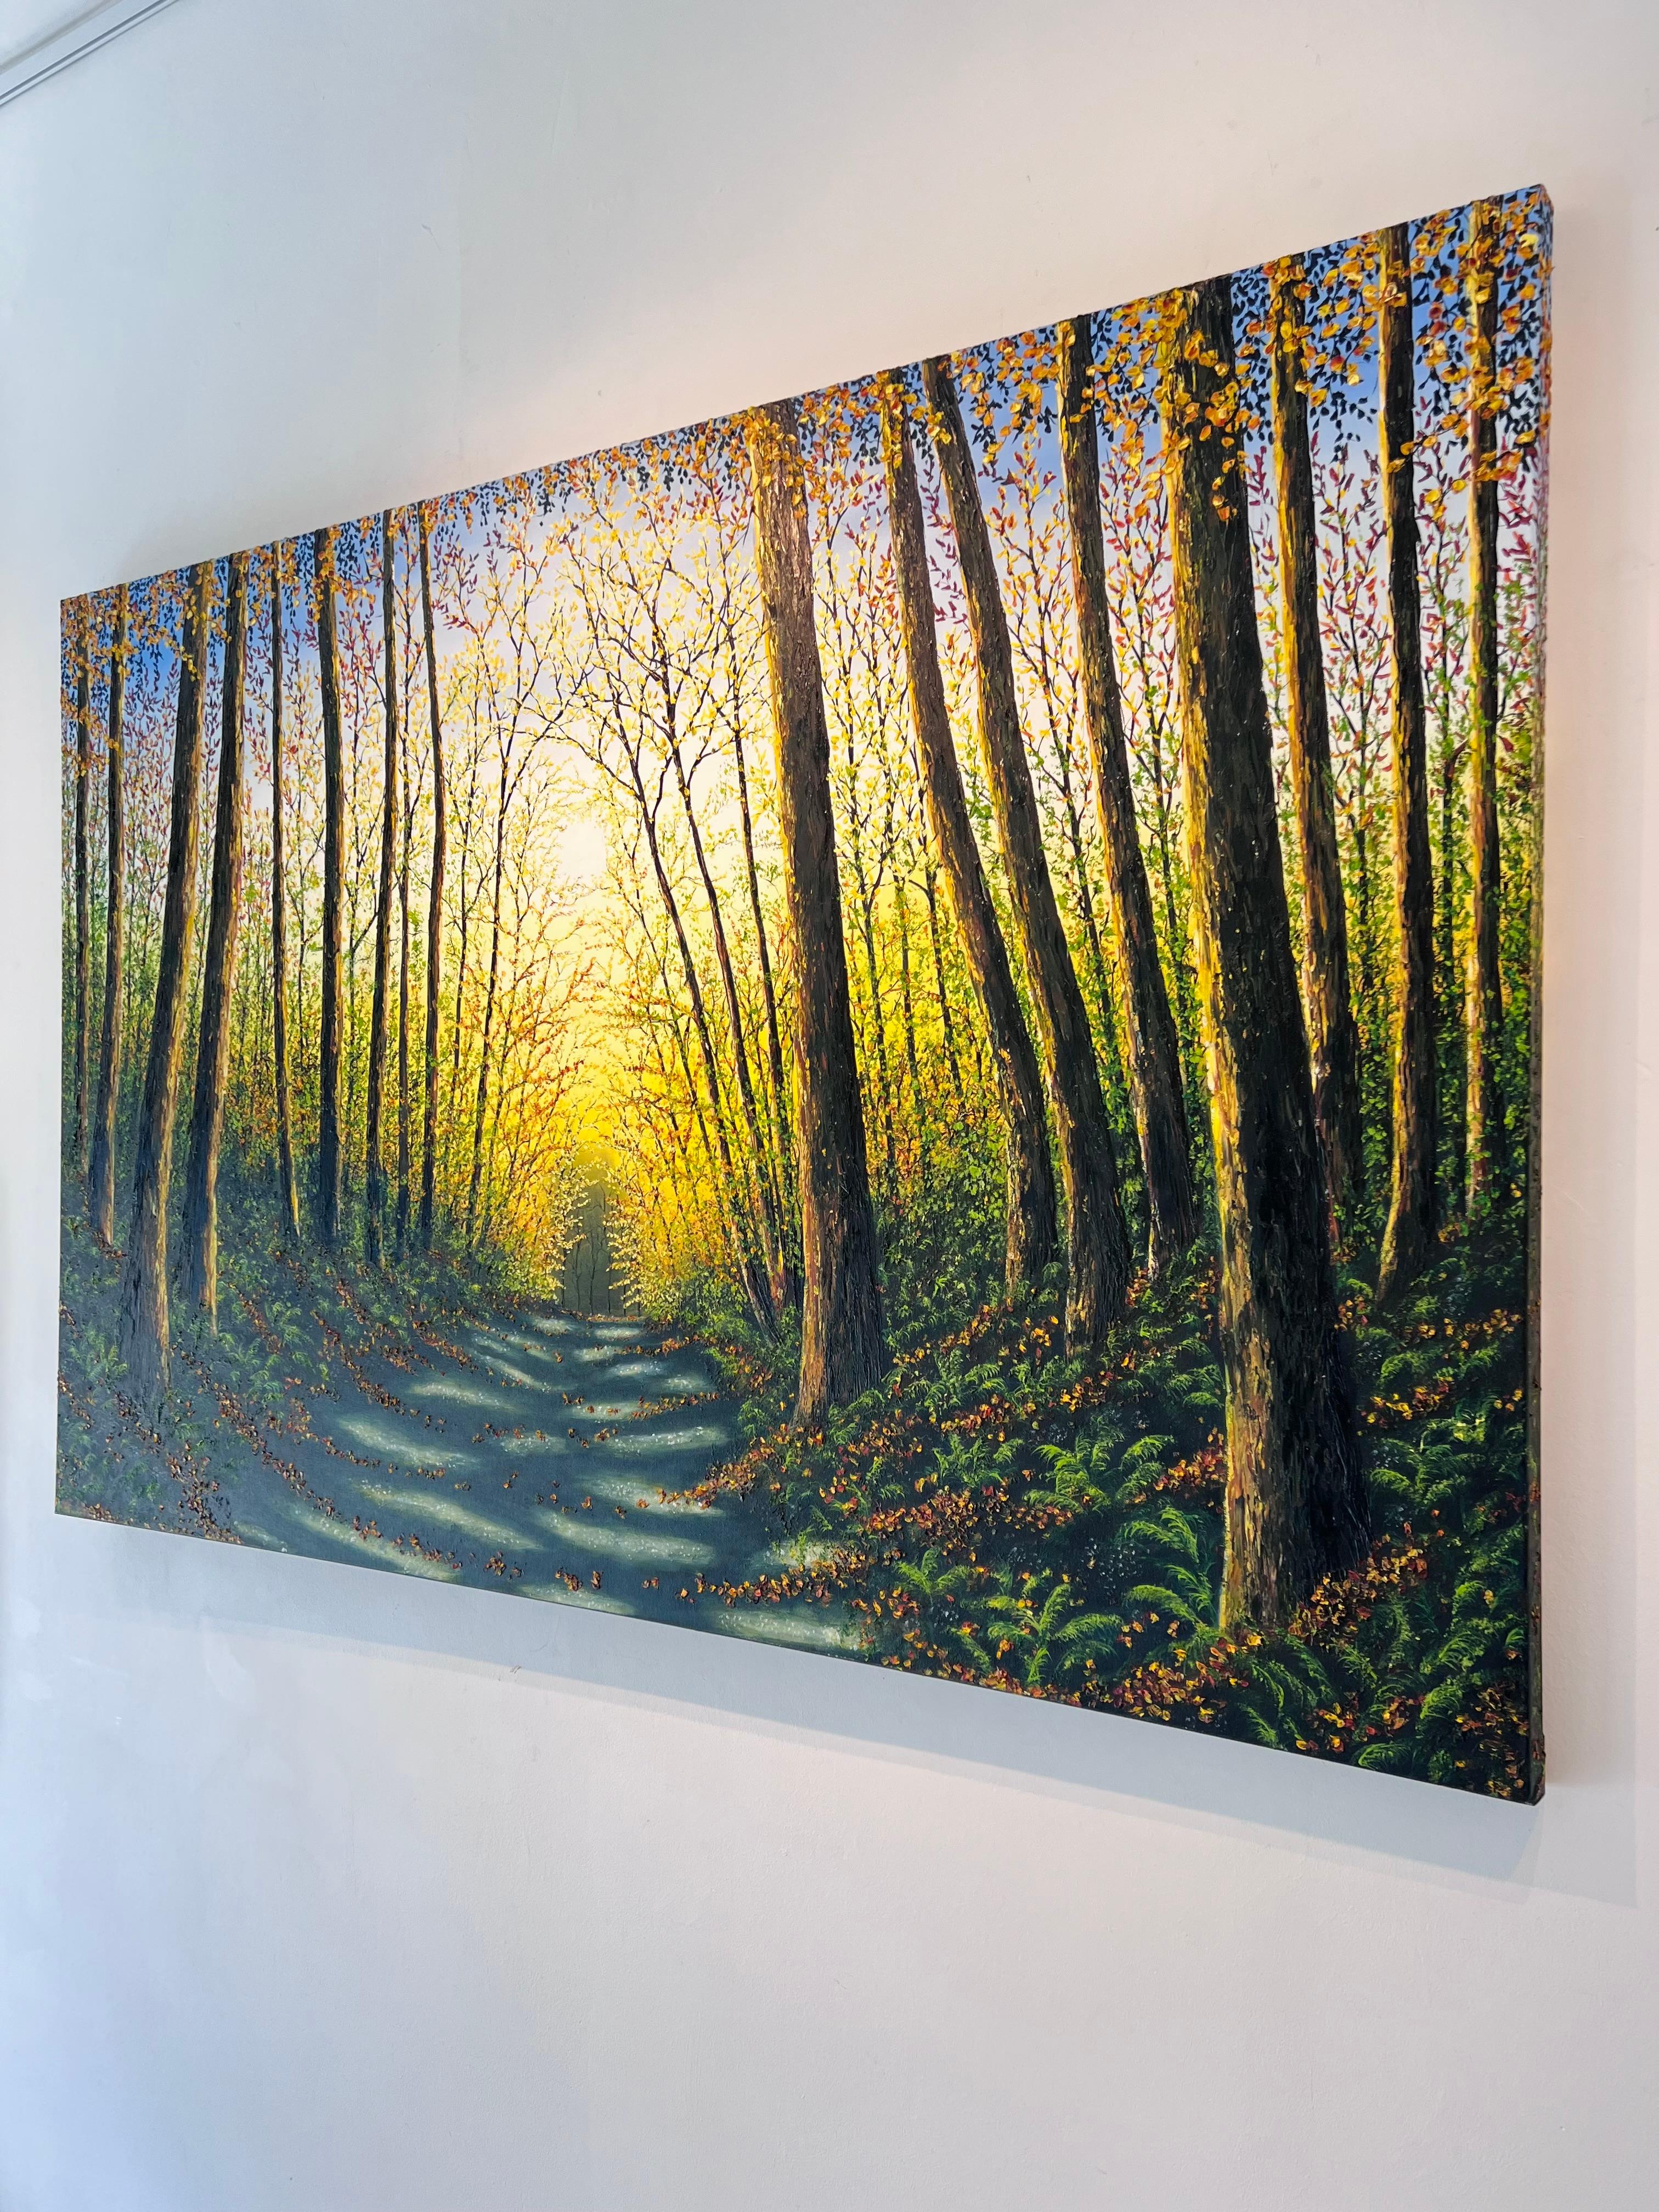 Patterns of Forest - original British landscape oil painting - contemporary art - Impressionist Painting by Hazel Thomson